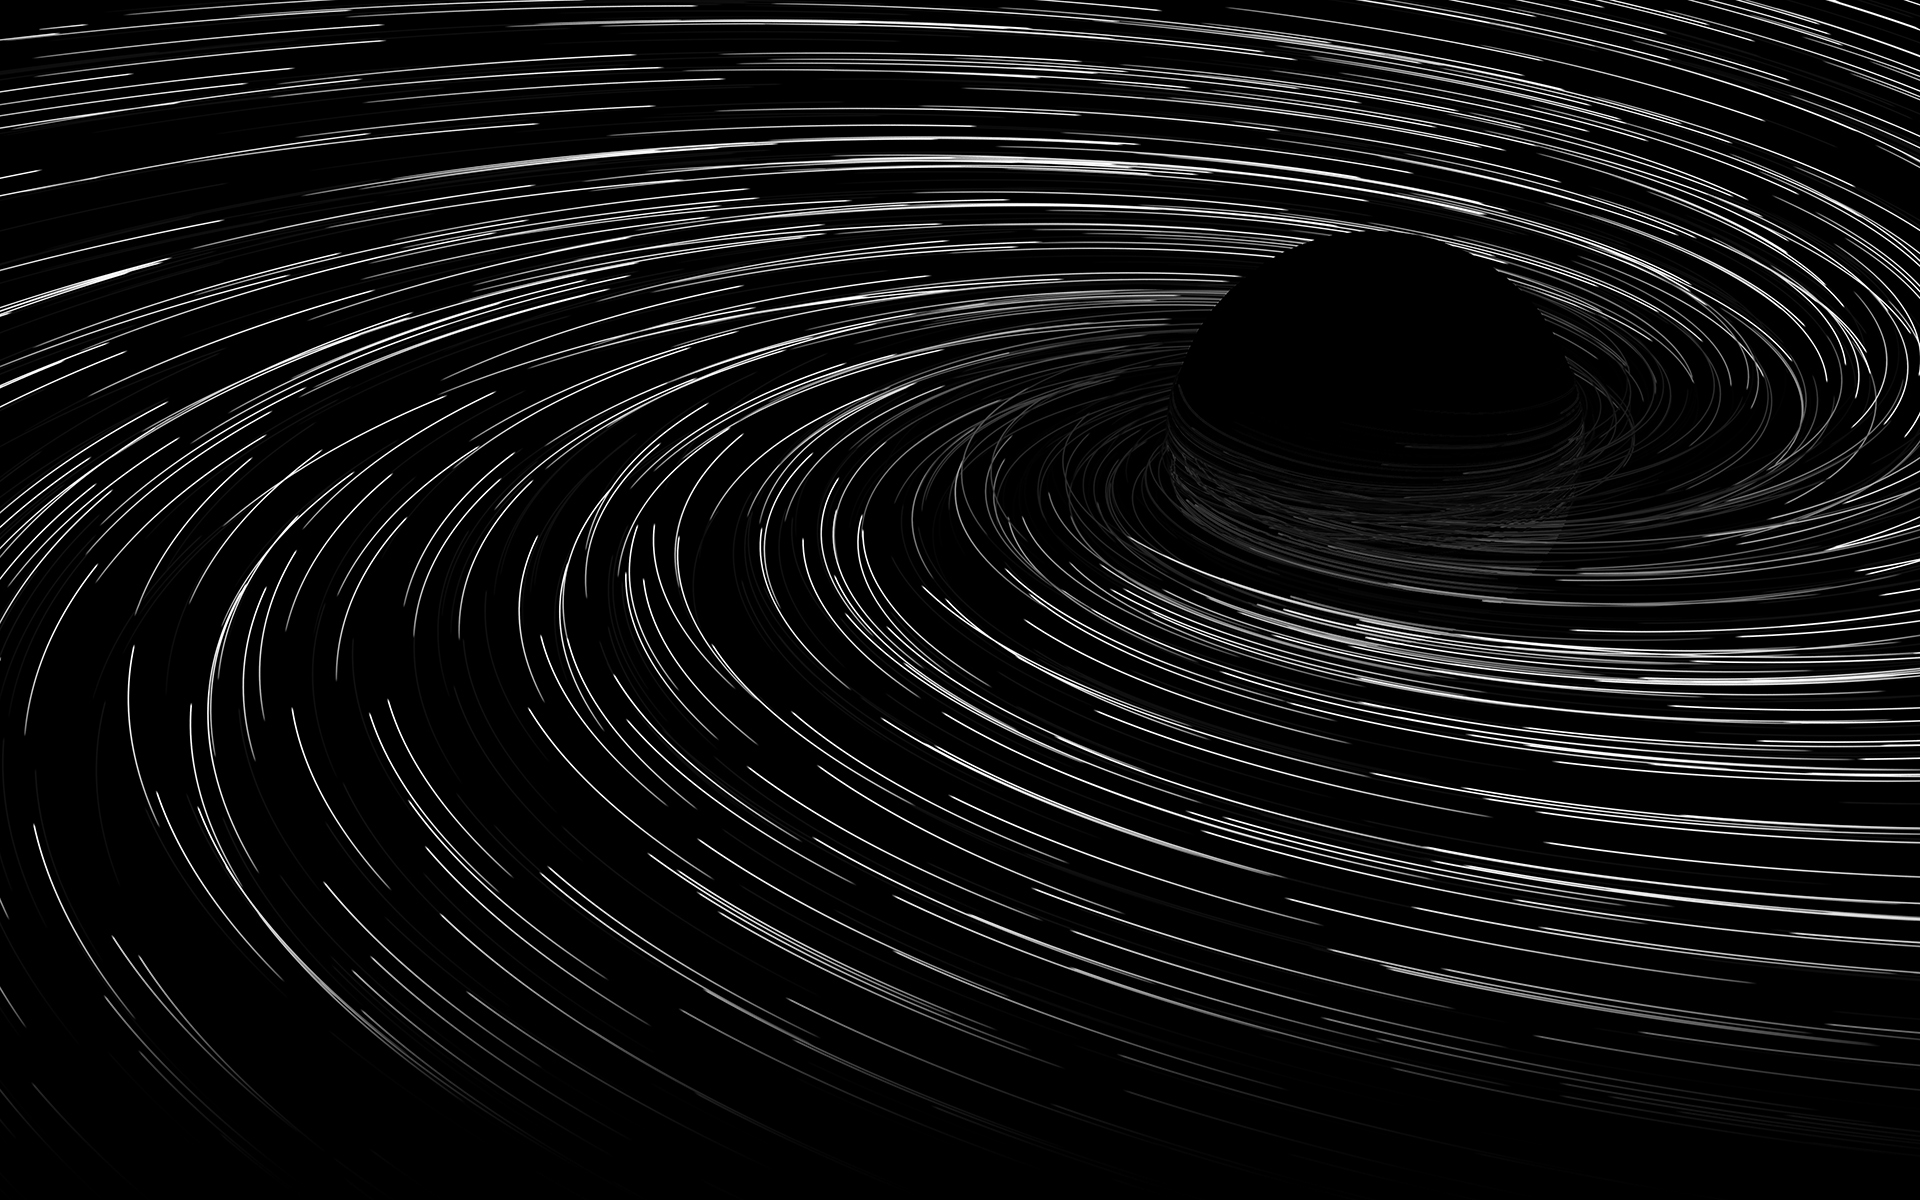 Steam animated background black hole :: Steam Discussions